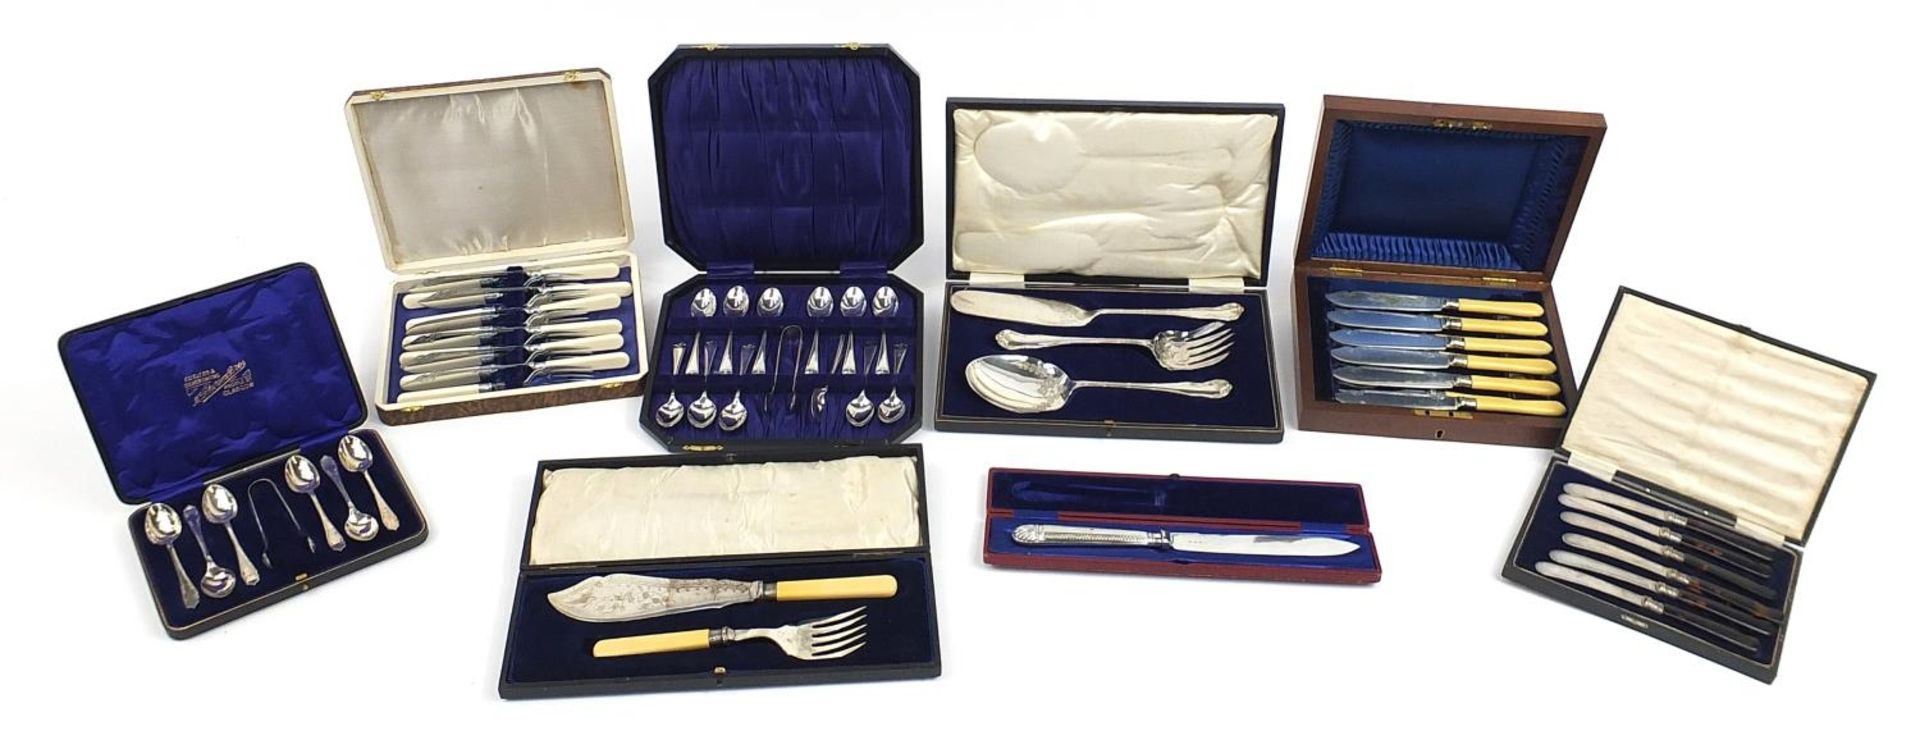 Silver plated cutlery housed in fitted cases including set of six fish knives and forks with ivorine